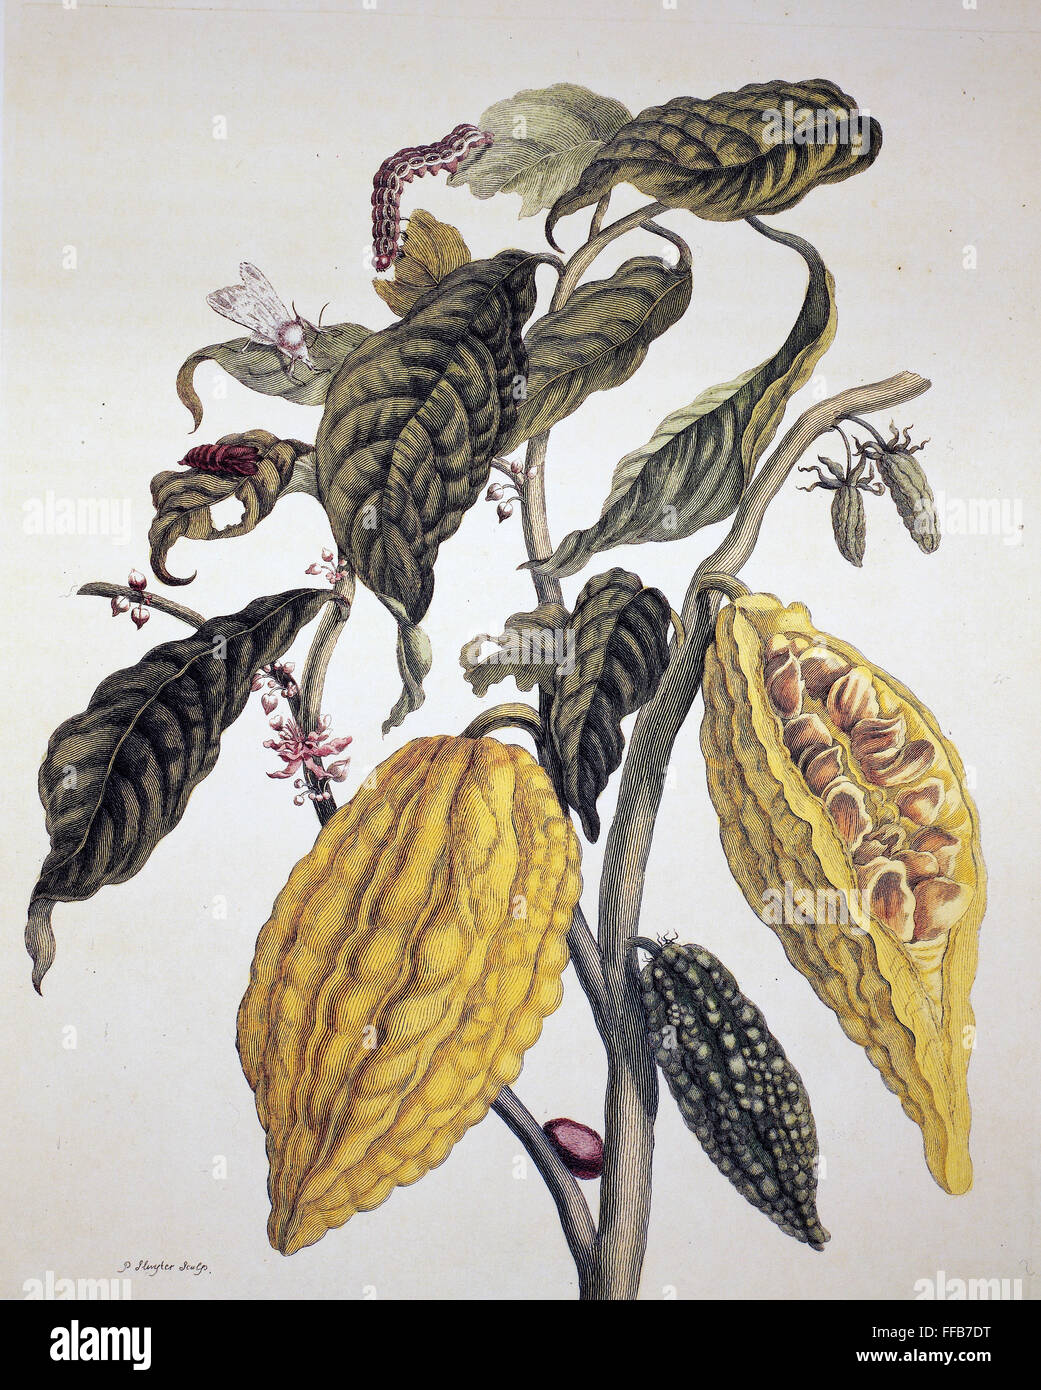 COCOA. /nBranch of a cocoa tree (Theobroma cacao). Line engraving by P. Sluyter after a drawing by Maria Sibylla Merian, from Merian's 'De metamorphosibus insectorum Surinamensium,' 1705. Stock Photo